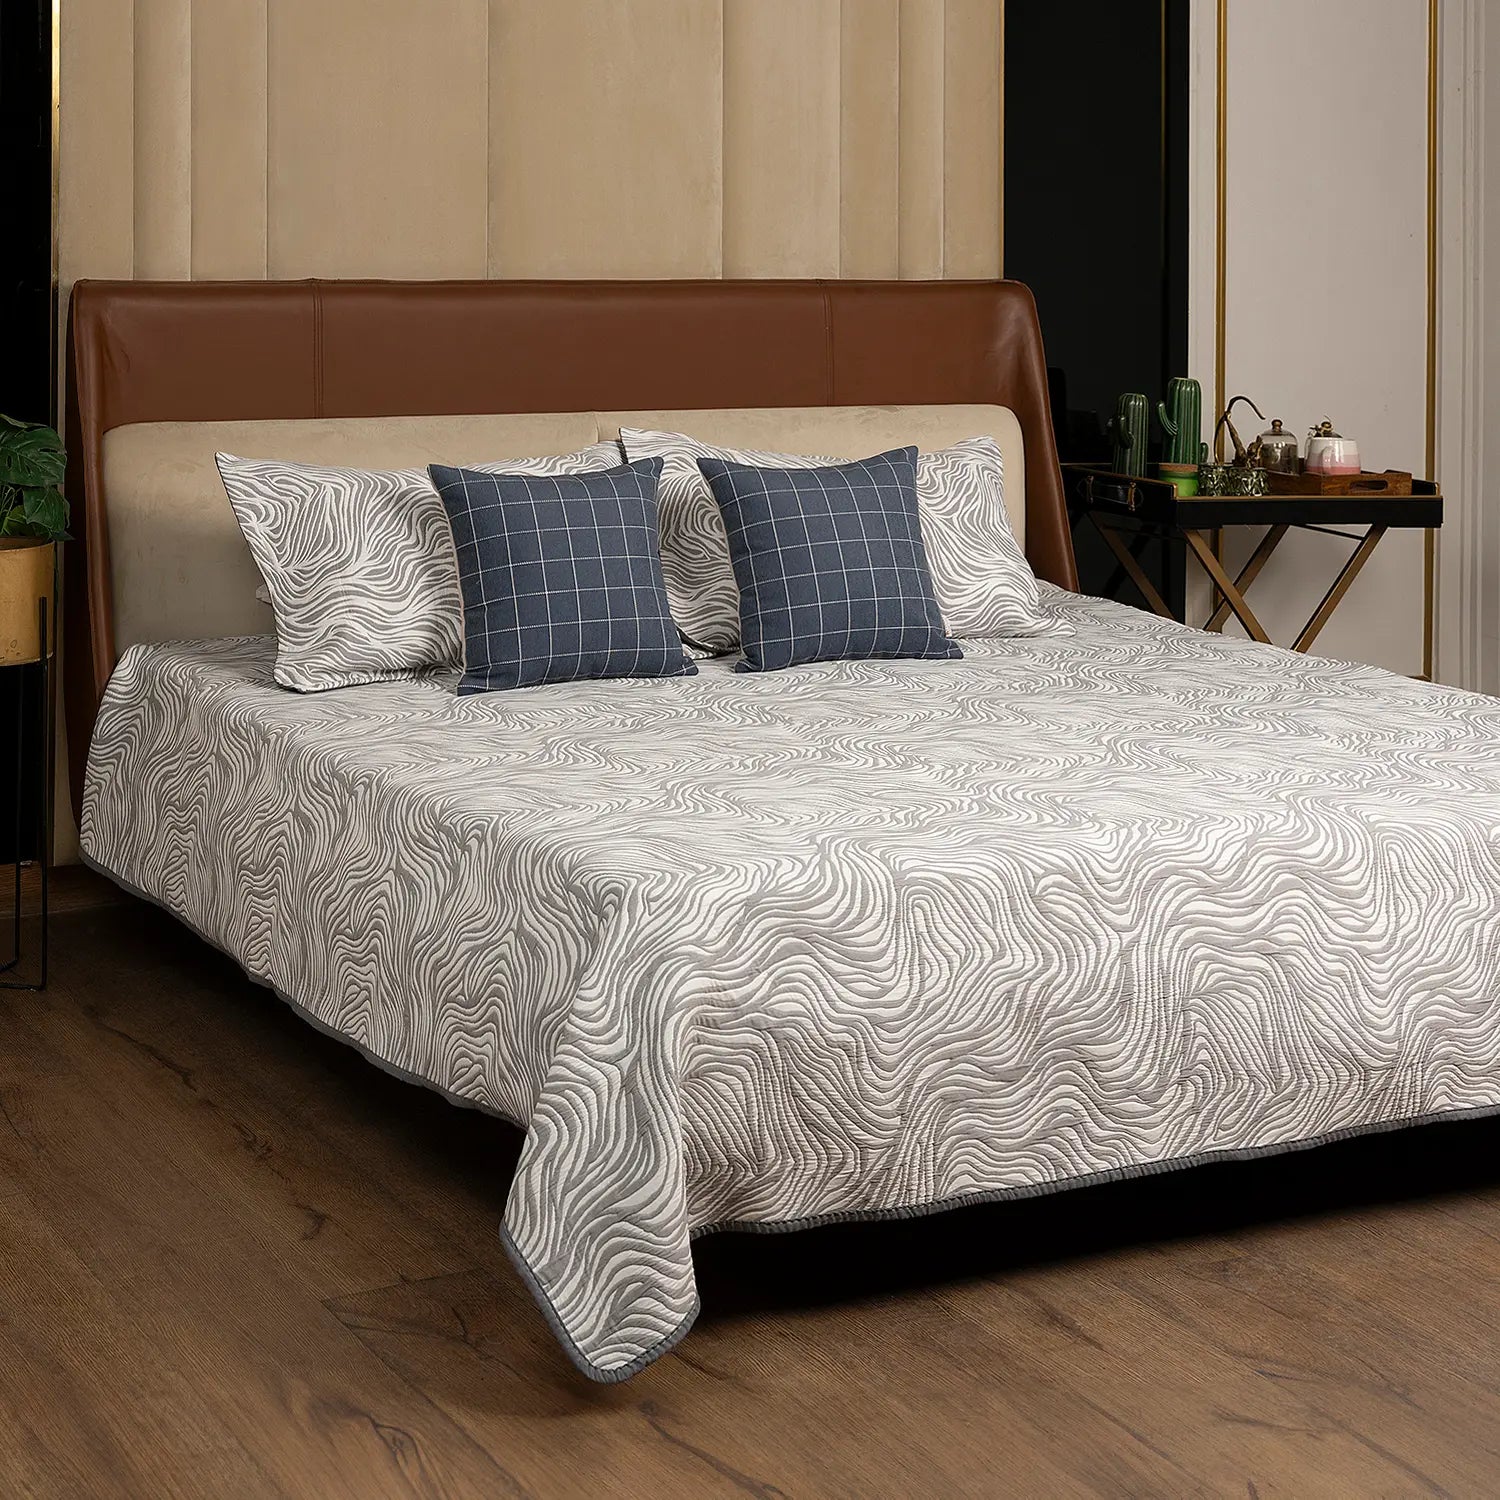 Calla Lily Bedcover